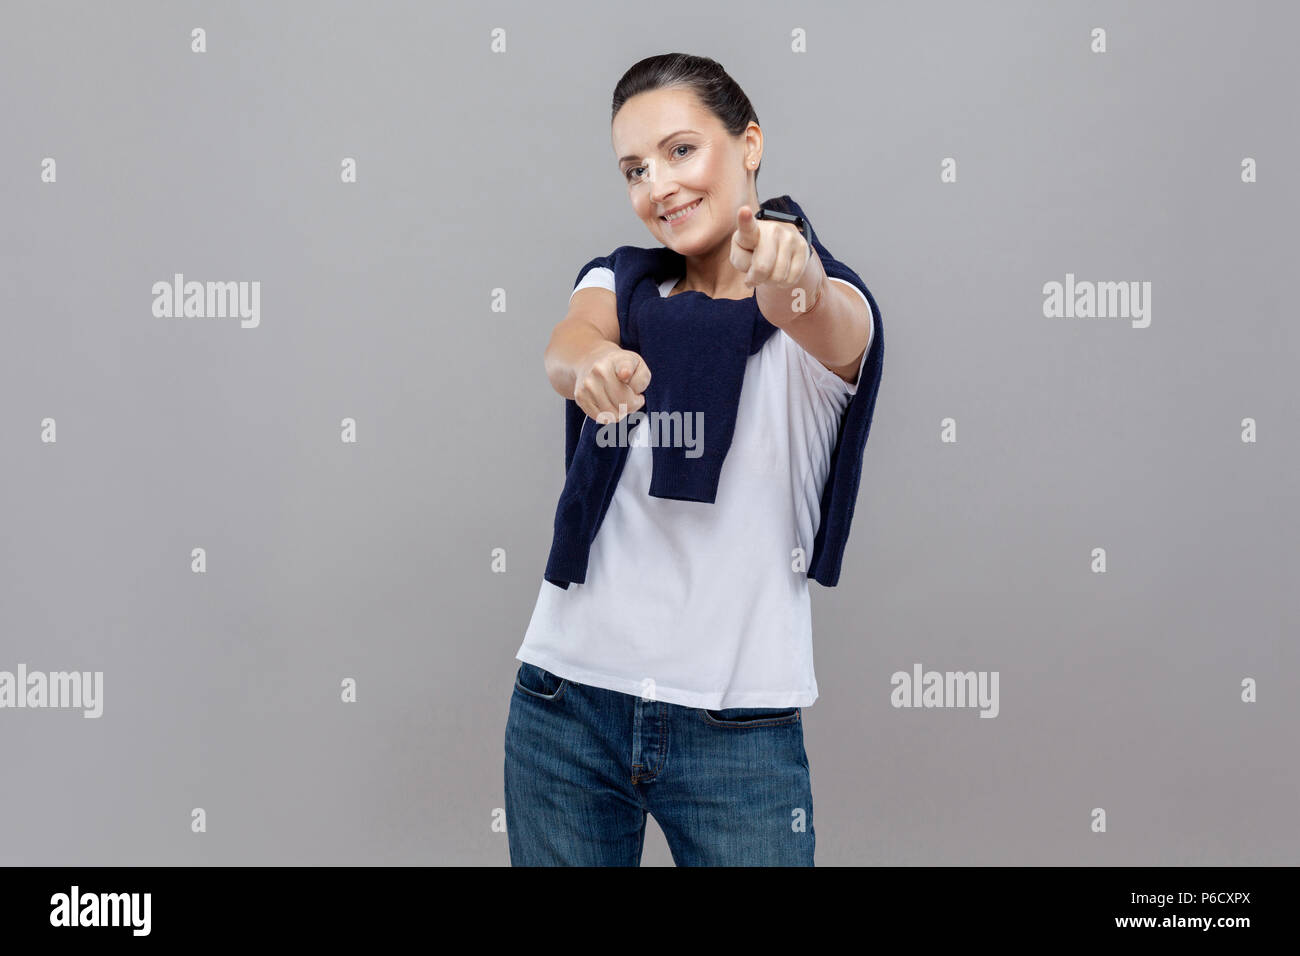 Adult cute woman in casual clothes choice fingers at camera with jeans and sweater on her shoulders, smart watch on arm, Studio shot, isolated on grey Stock Photo